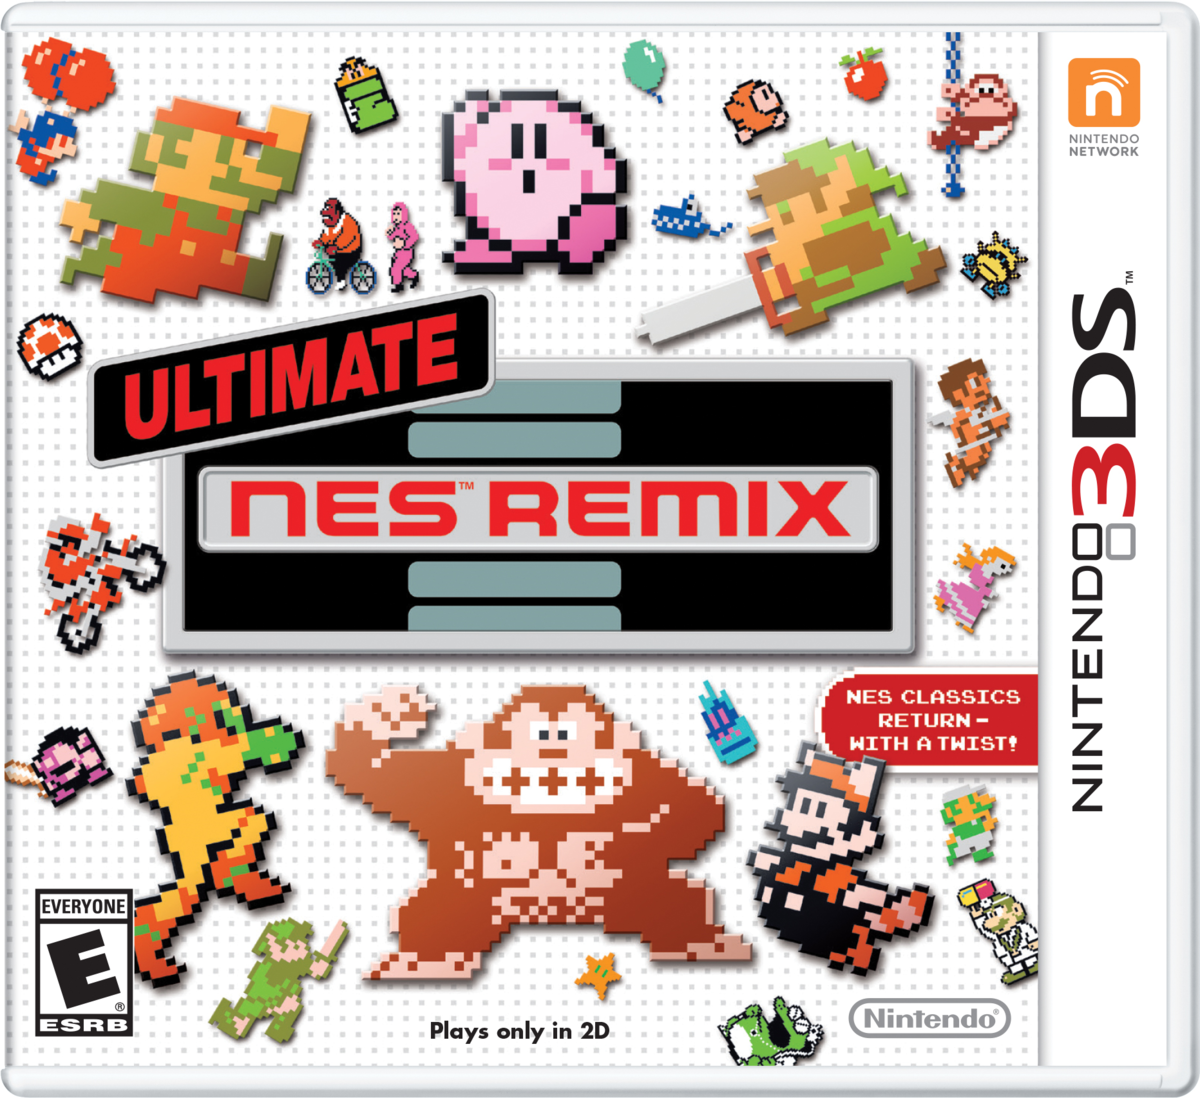 NES Remix Pack (Nintendo Wii U, 2014) Game Nintendo Selects Complete